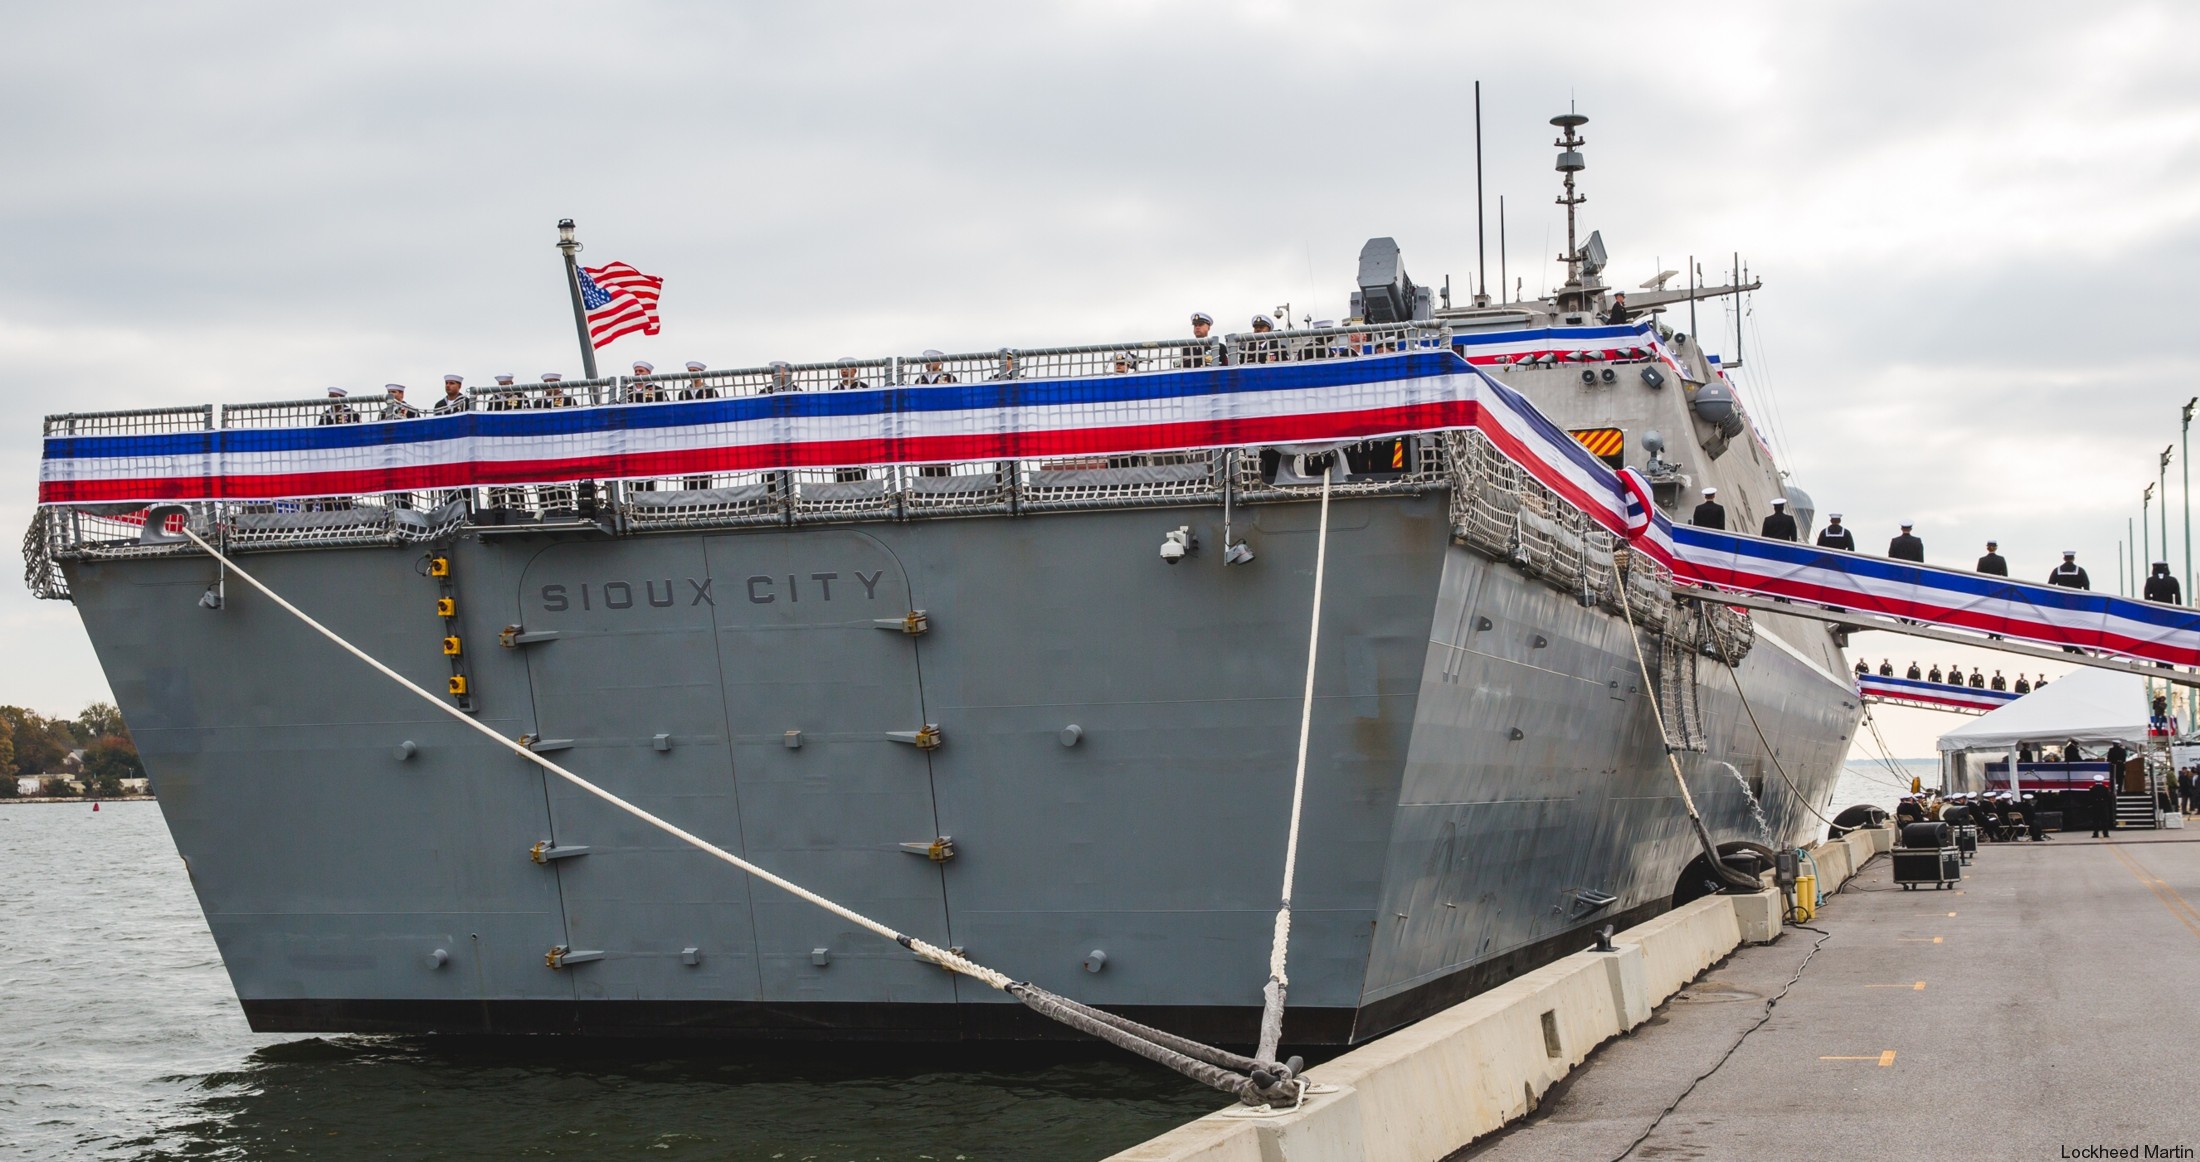 lcs-11 uss sioux city freedom class littoral combat ship us navy 17 commissioning annapolis